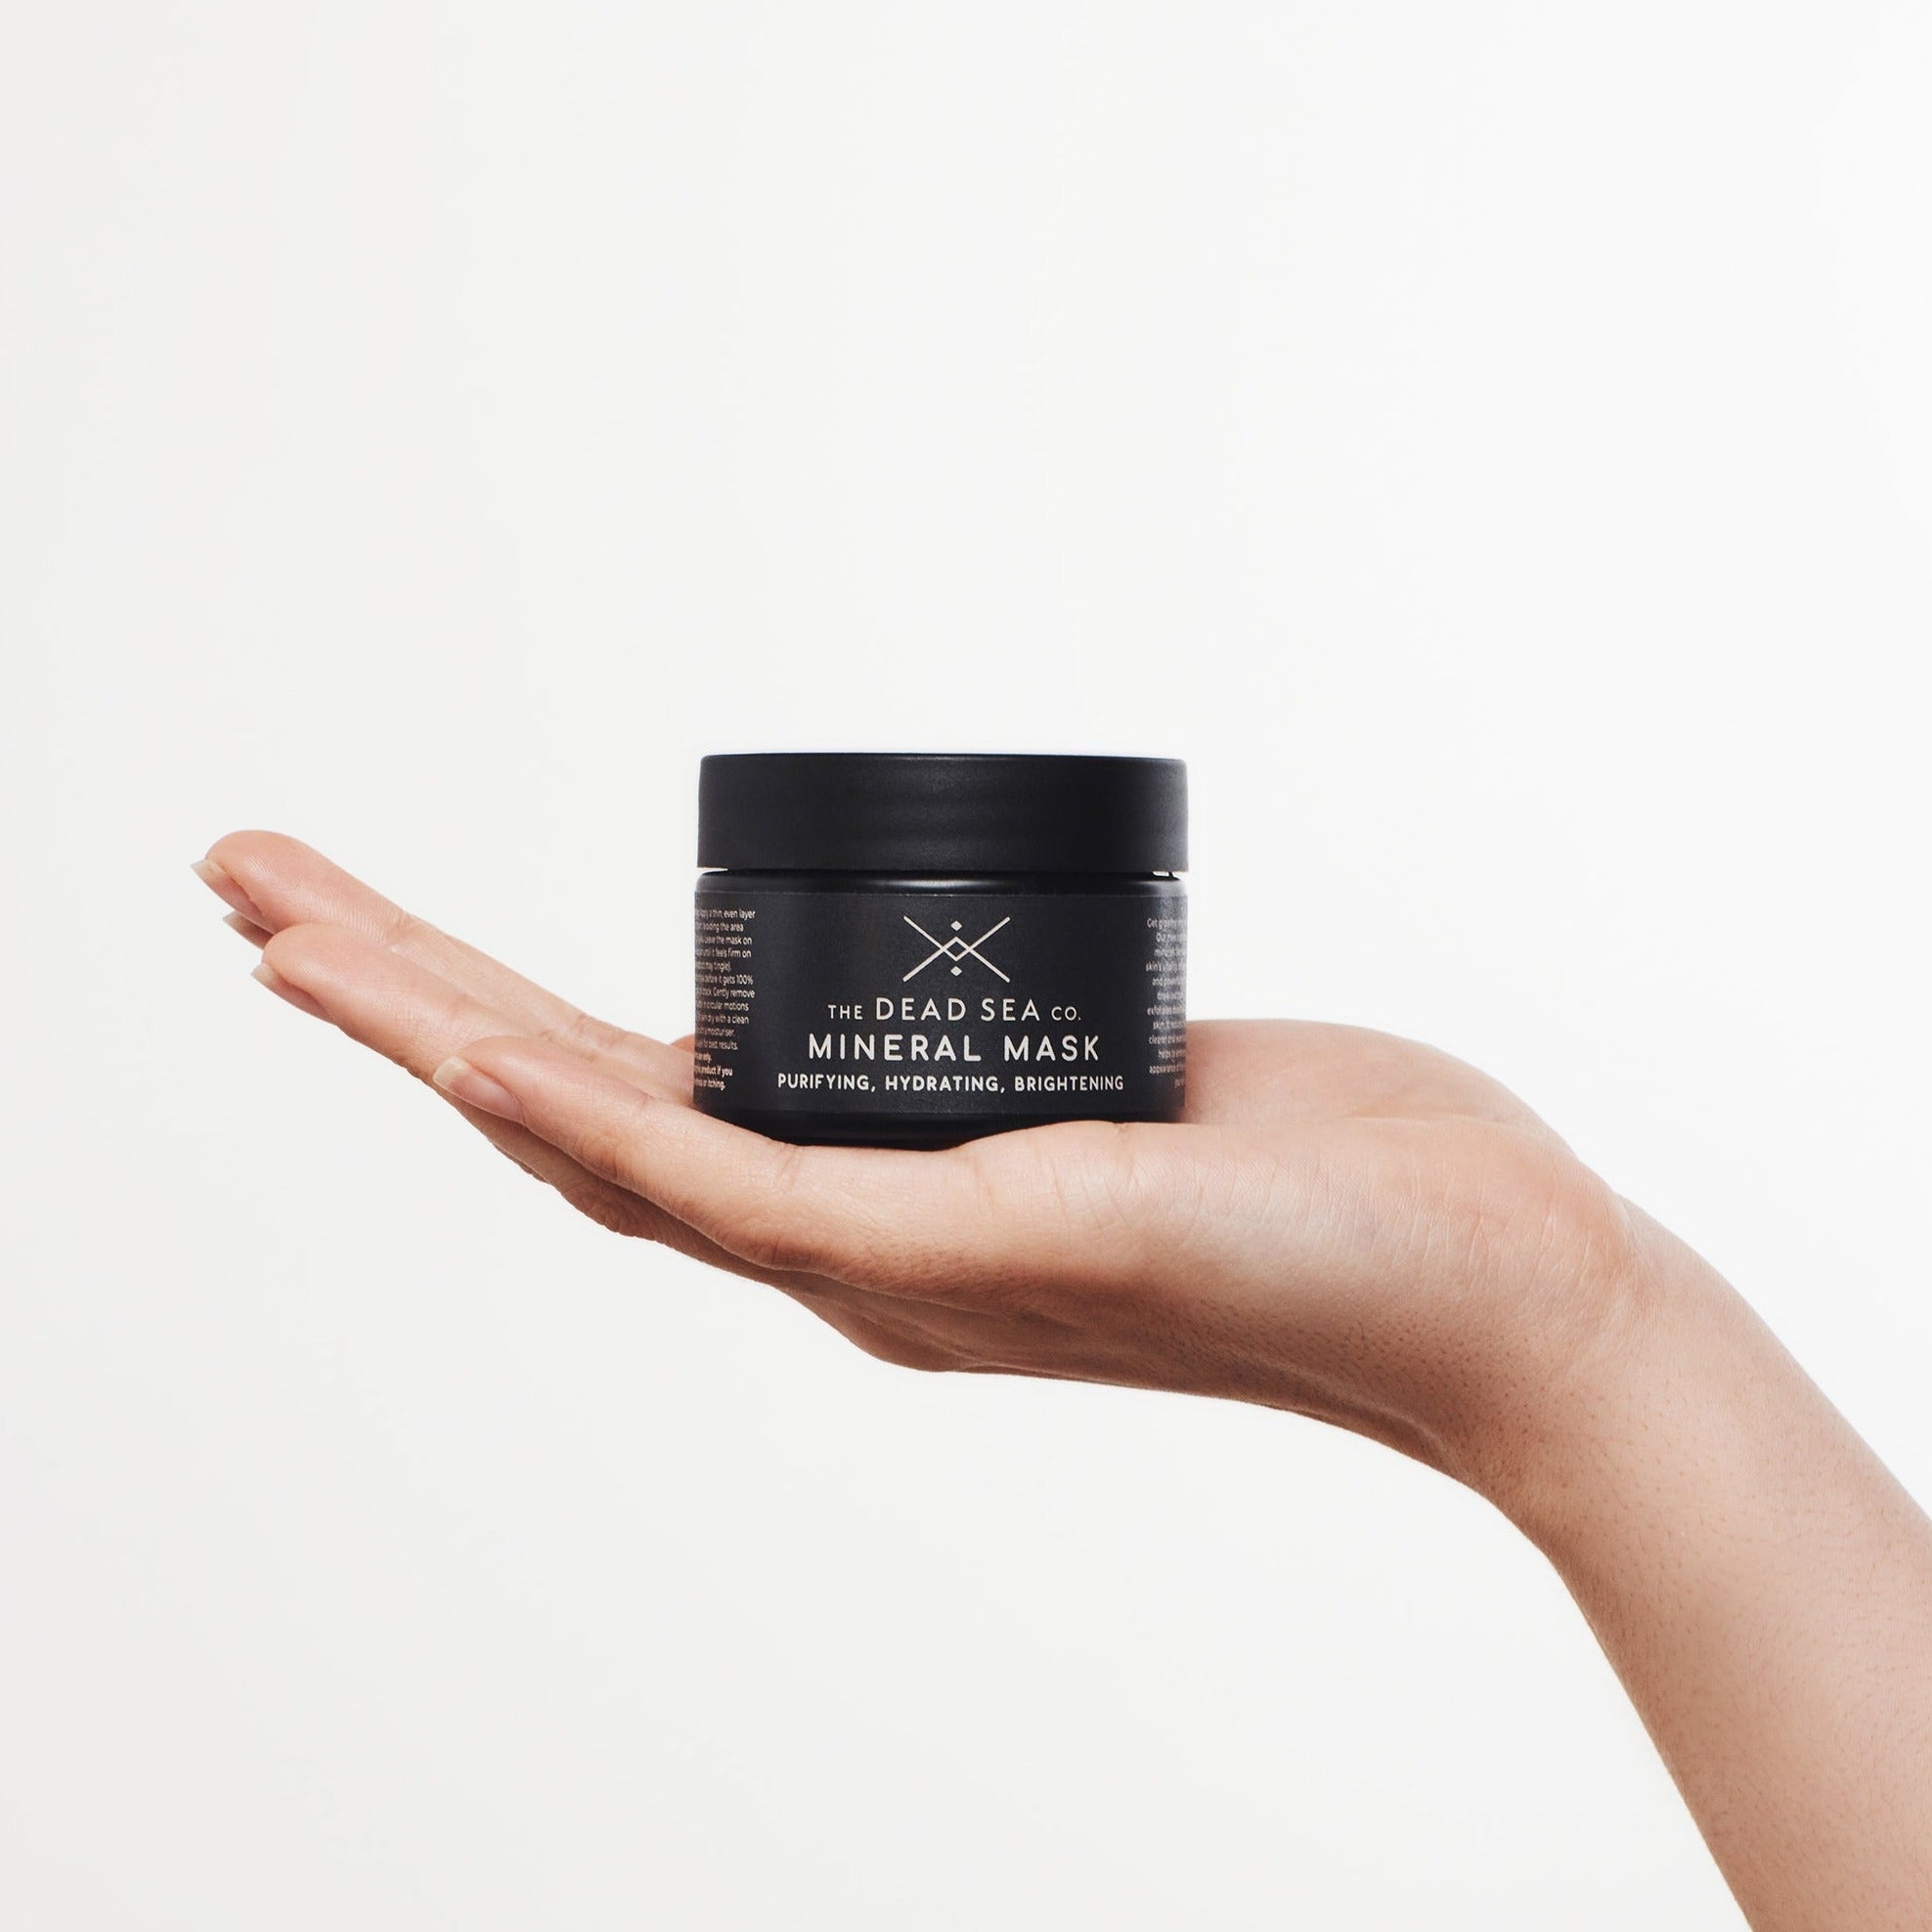 A woman's hand is gracefully holding a black glass jar, which houses the Dead Sea mud mask. The packaging has a sleek and sophisticated design, characterized by its minimalist style. The reflective jar exudes luxury, and its black color adds a touch of elegance to the overall aesthetic.